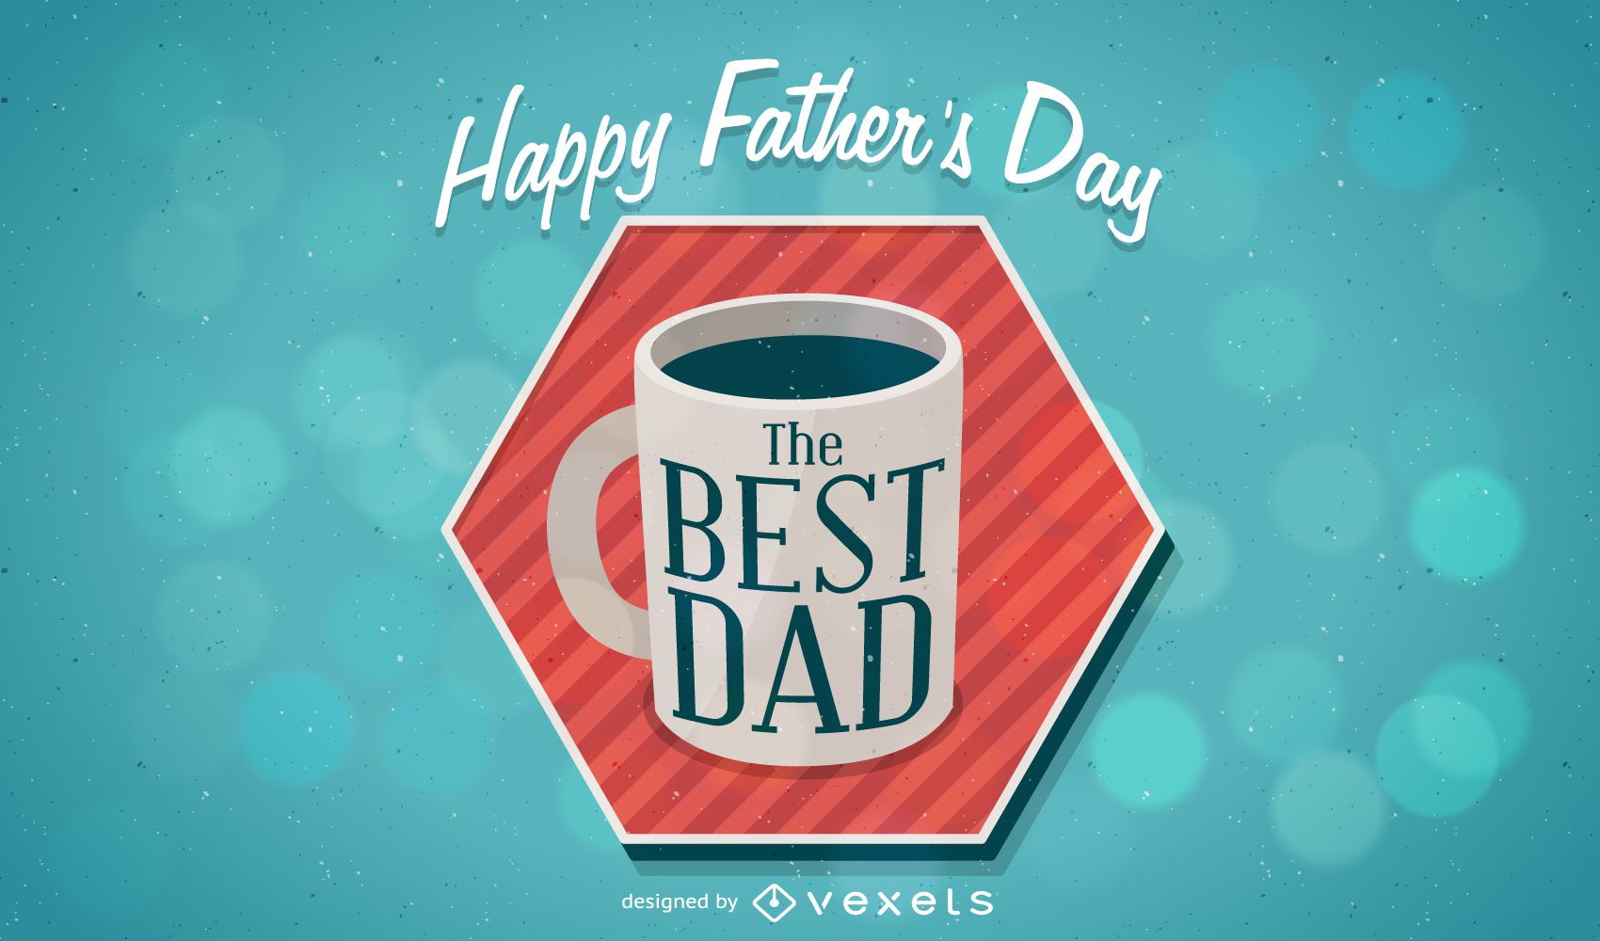 Happy Father's Day design with coffee mug